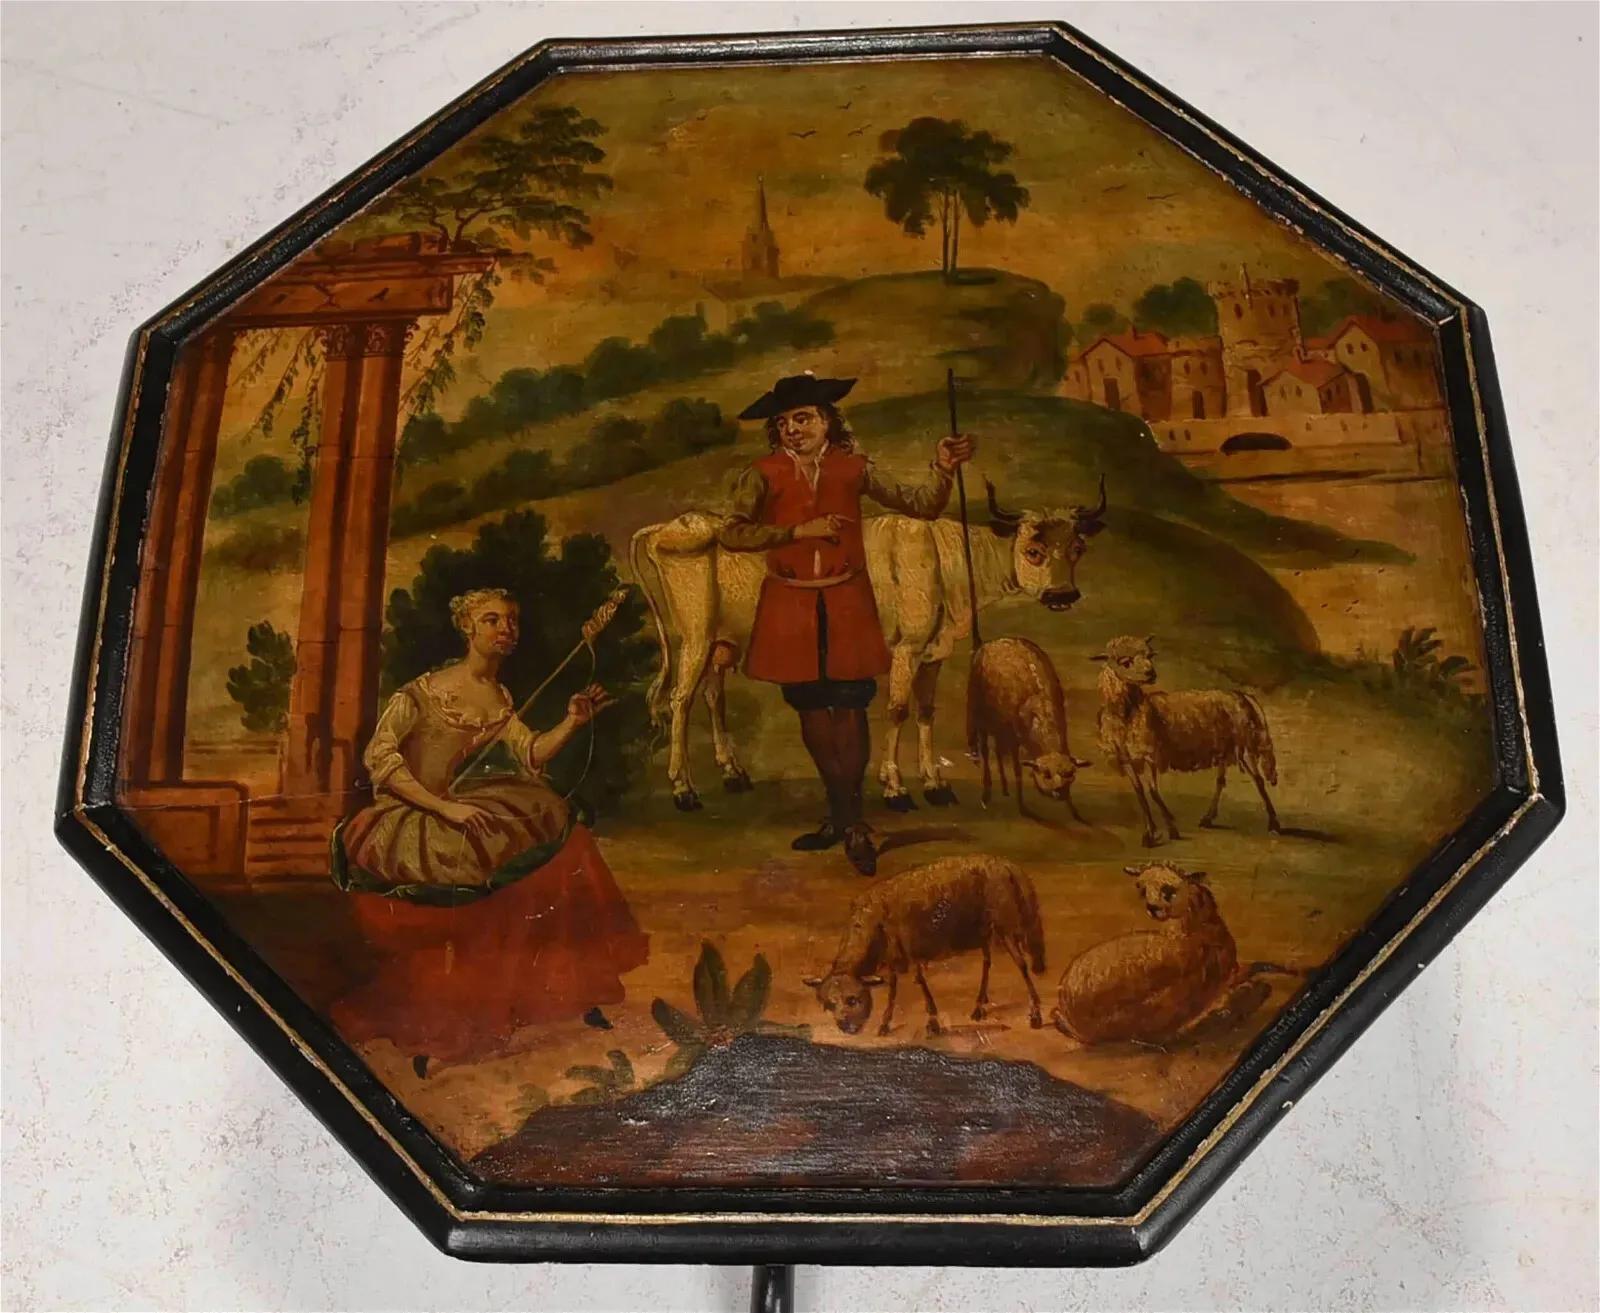 Charming Antique Tea Table, Tilt Top, George III Style,  British, Paint Decorated, Octagonal, 1700s, 18th Century!

This antique tea table is a true gem for any collector. With its unique octagonal shape, it exudes a sense of history and elegance